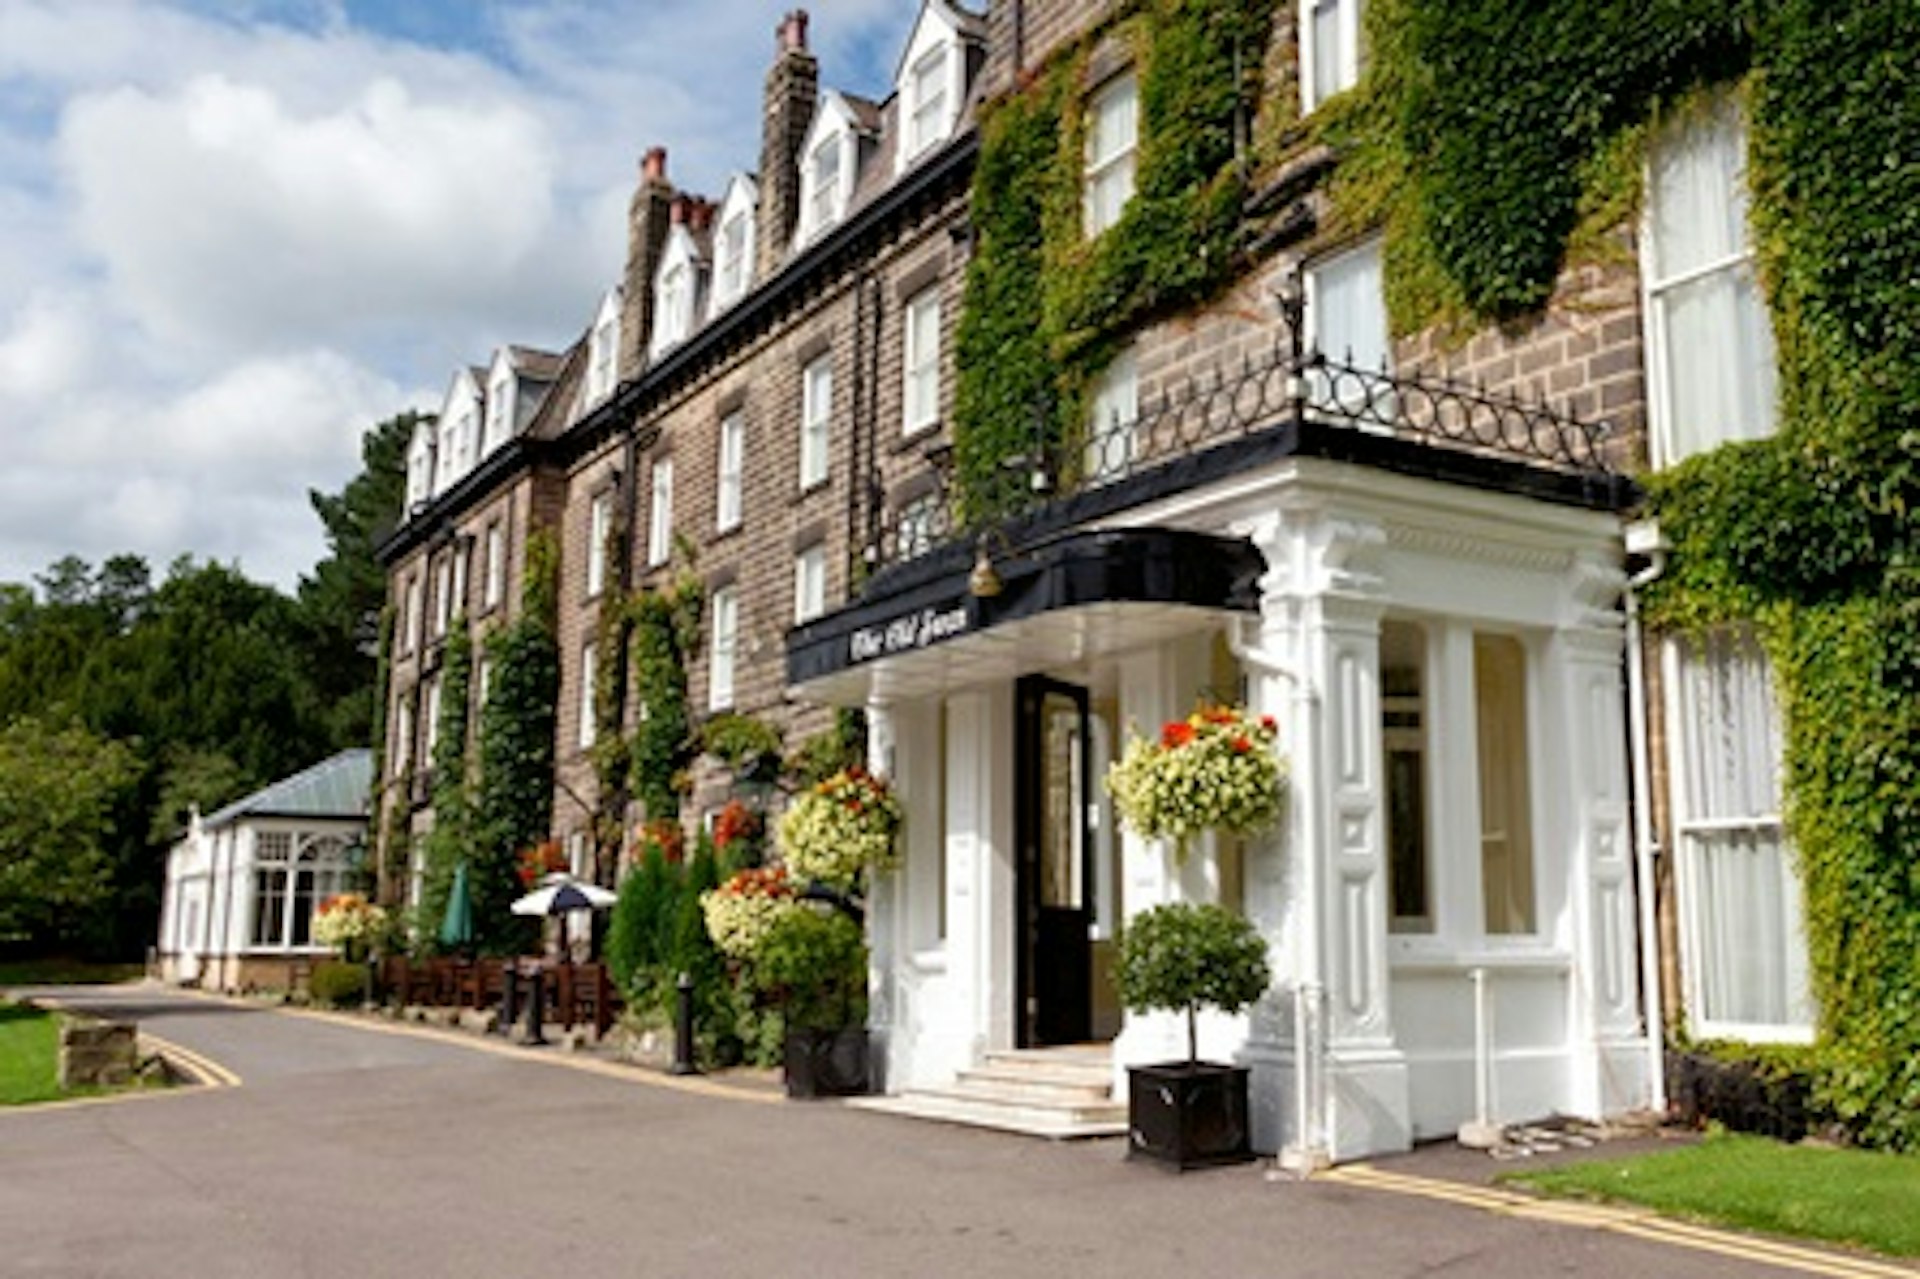 Deluxe Afternoon Tea for Two at The Old Swan Hotel 1